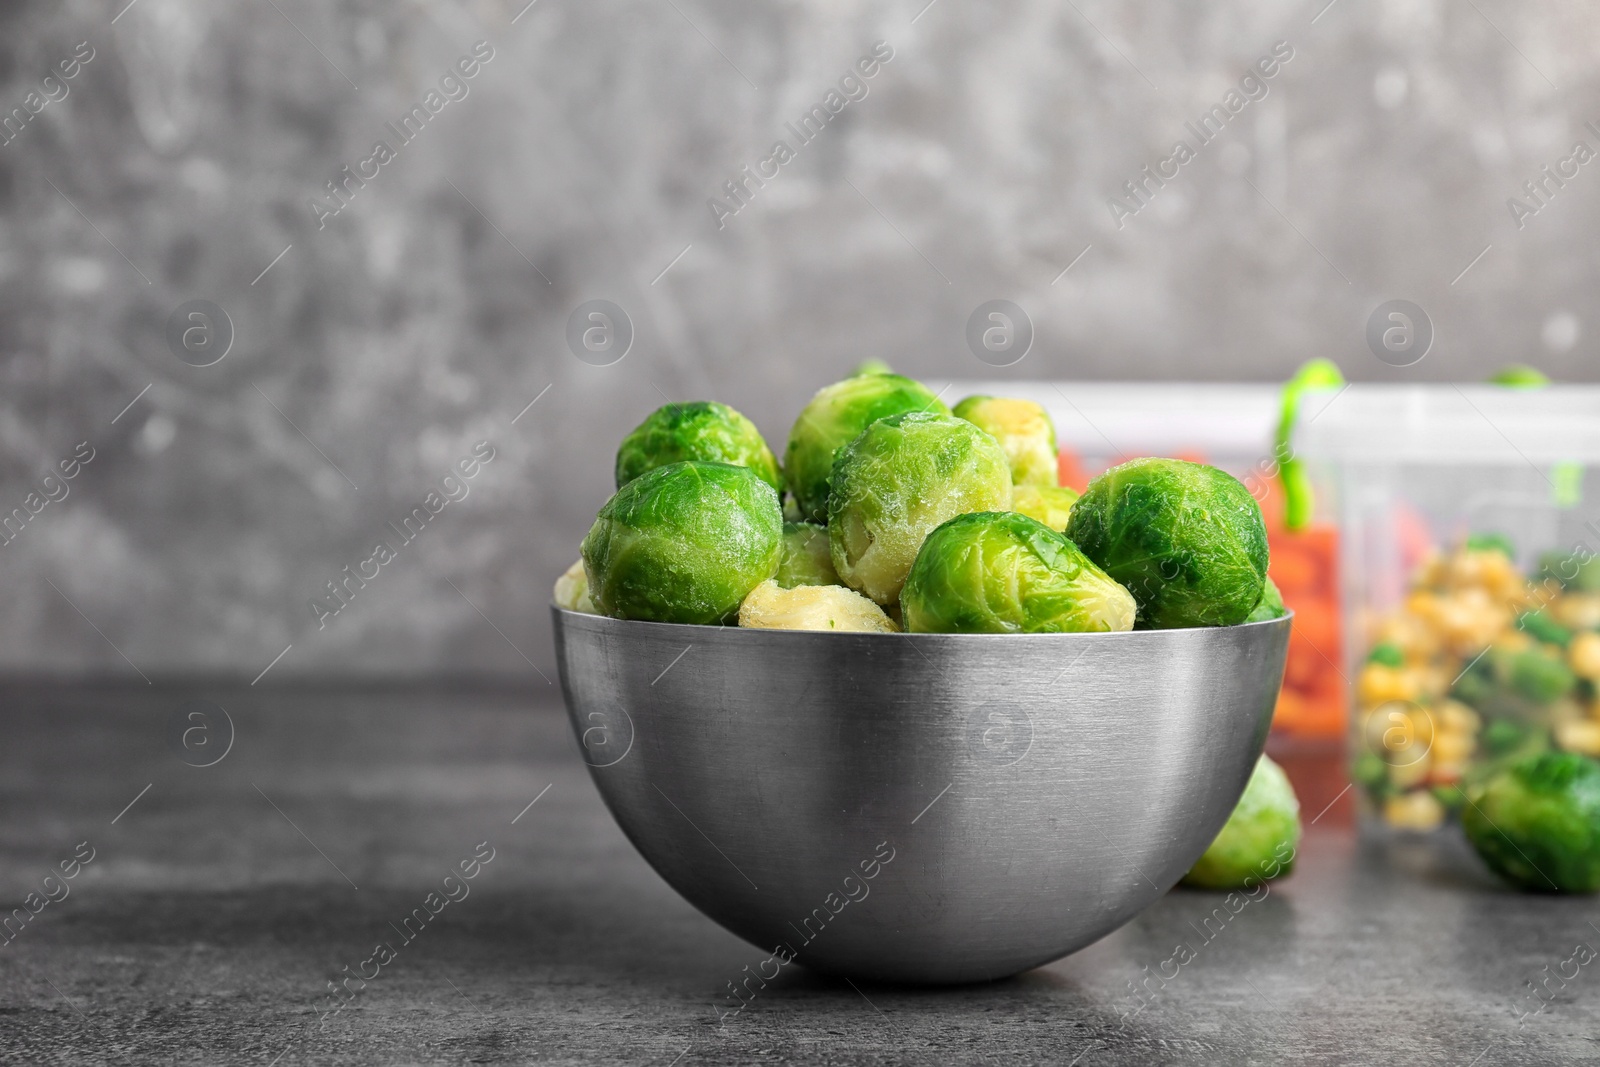 Photo of Bowl with frozen Brussel sprouts on table. Vegetable preservation